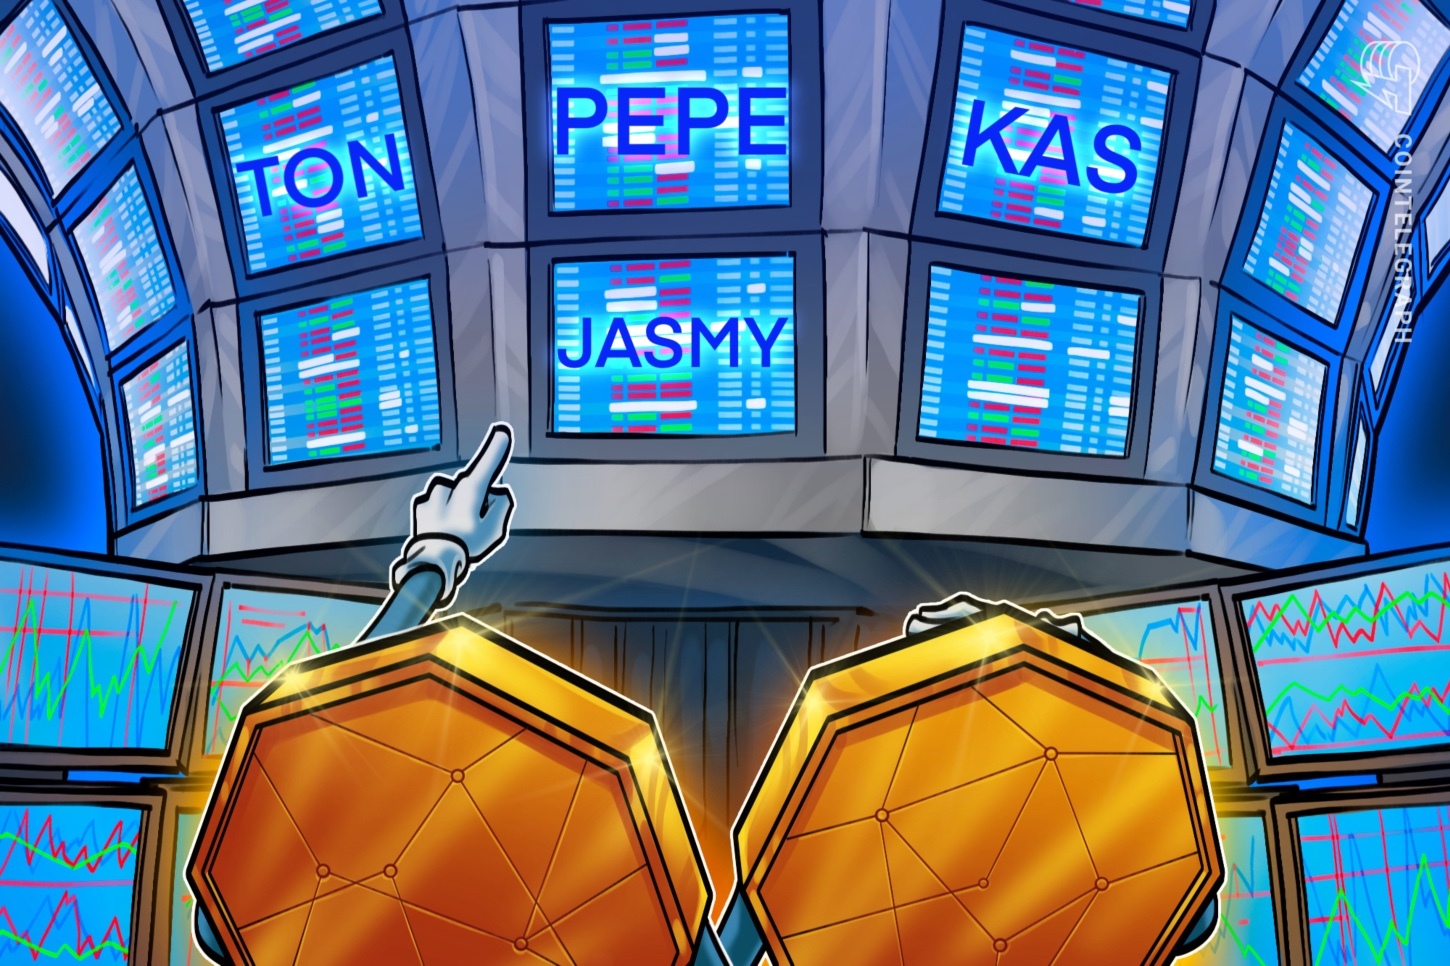 Bitcoin price loses ground as TON, PEPE, KAS and JASMY catch traders’ attention